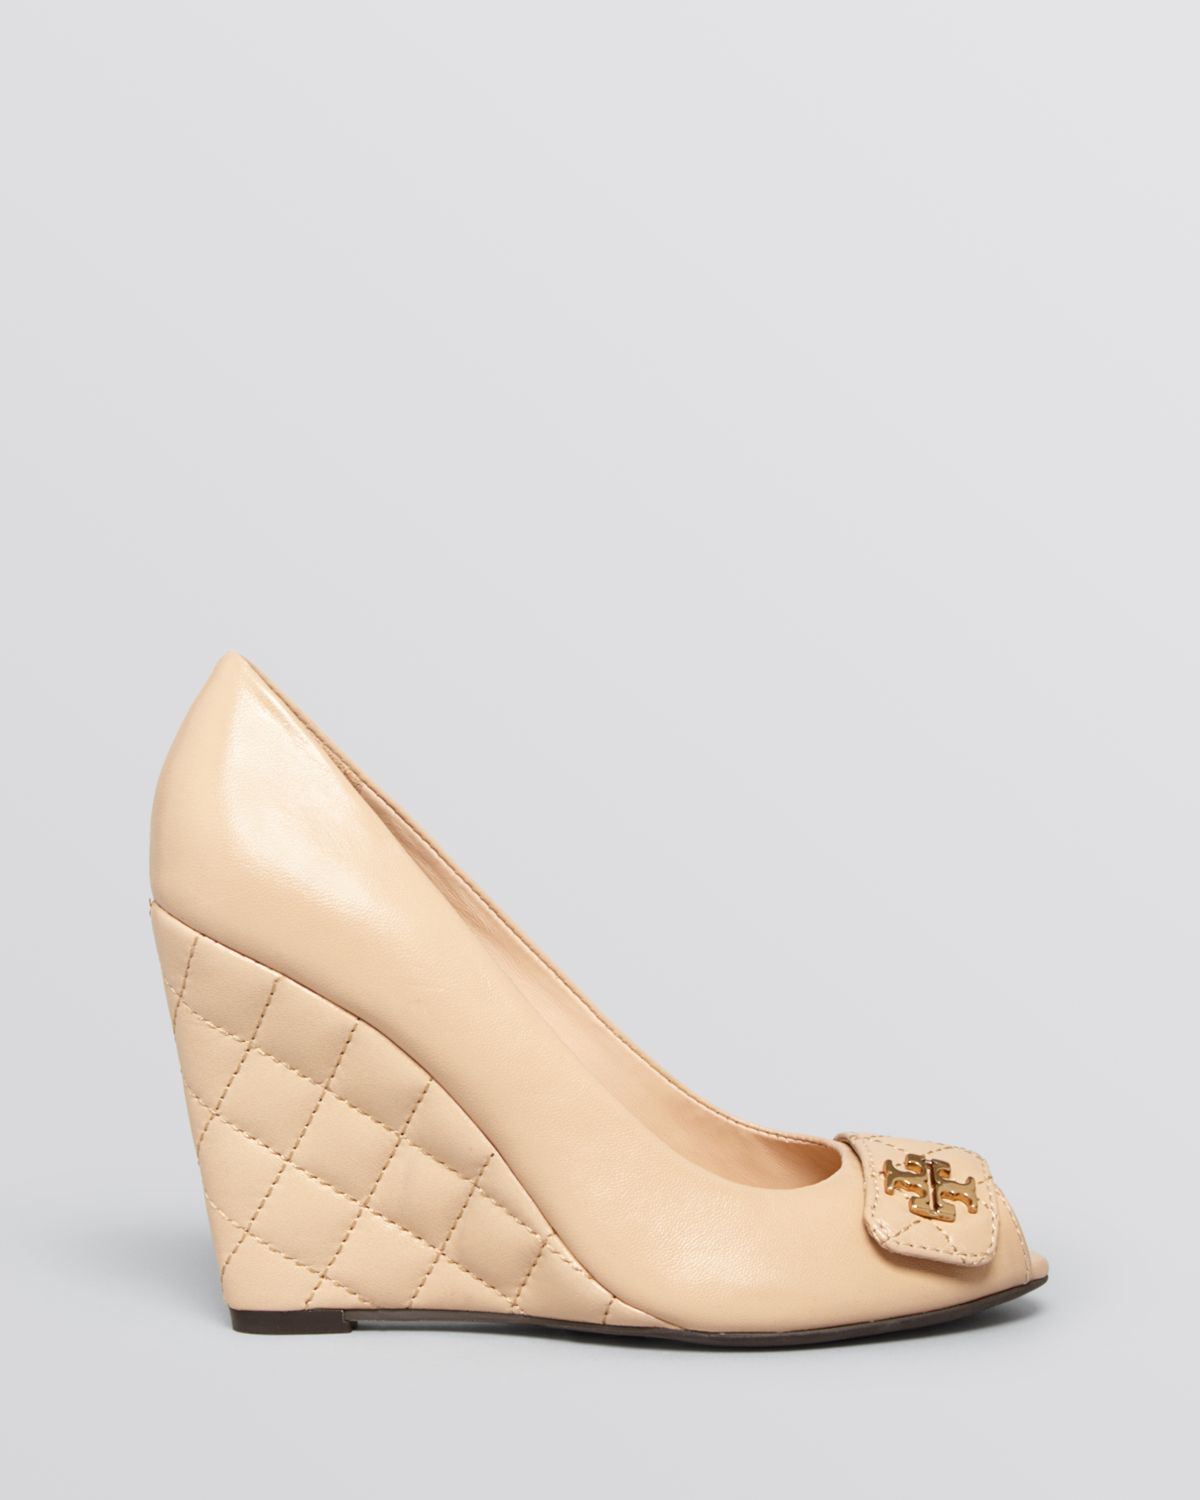 Tory Burch Peep Toe Wedge Pumps - Leila Quilted in Black (Natural) | Lyst